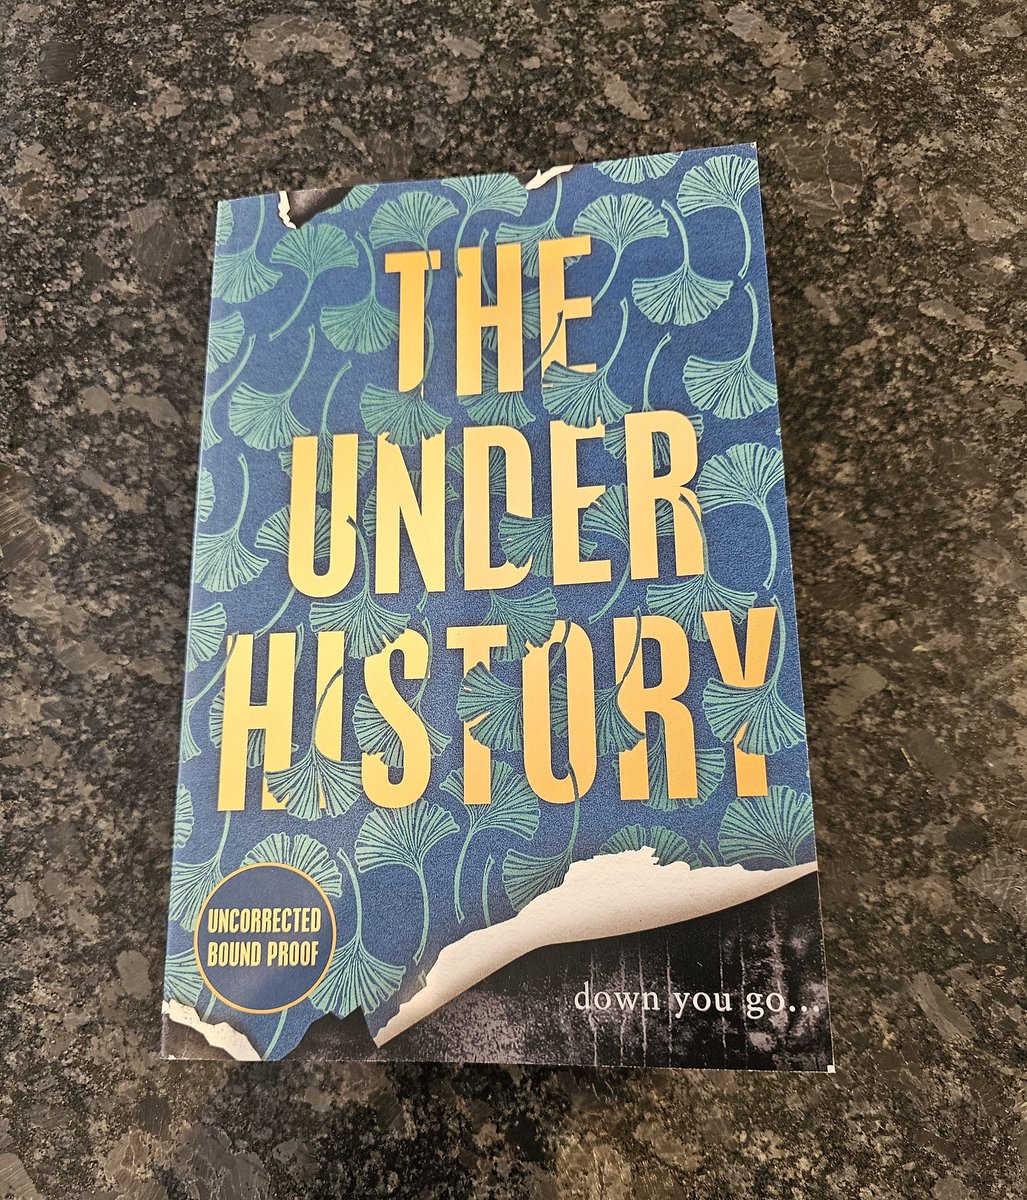 Thank you so much Angie @ViperBooks for this lovely proof copy of #TheUnderHistory by @KaaronWarren 
Published on 11th April
I can't wait to read this! 
#bookbloggers #bookX #booktwitter